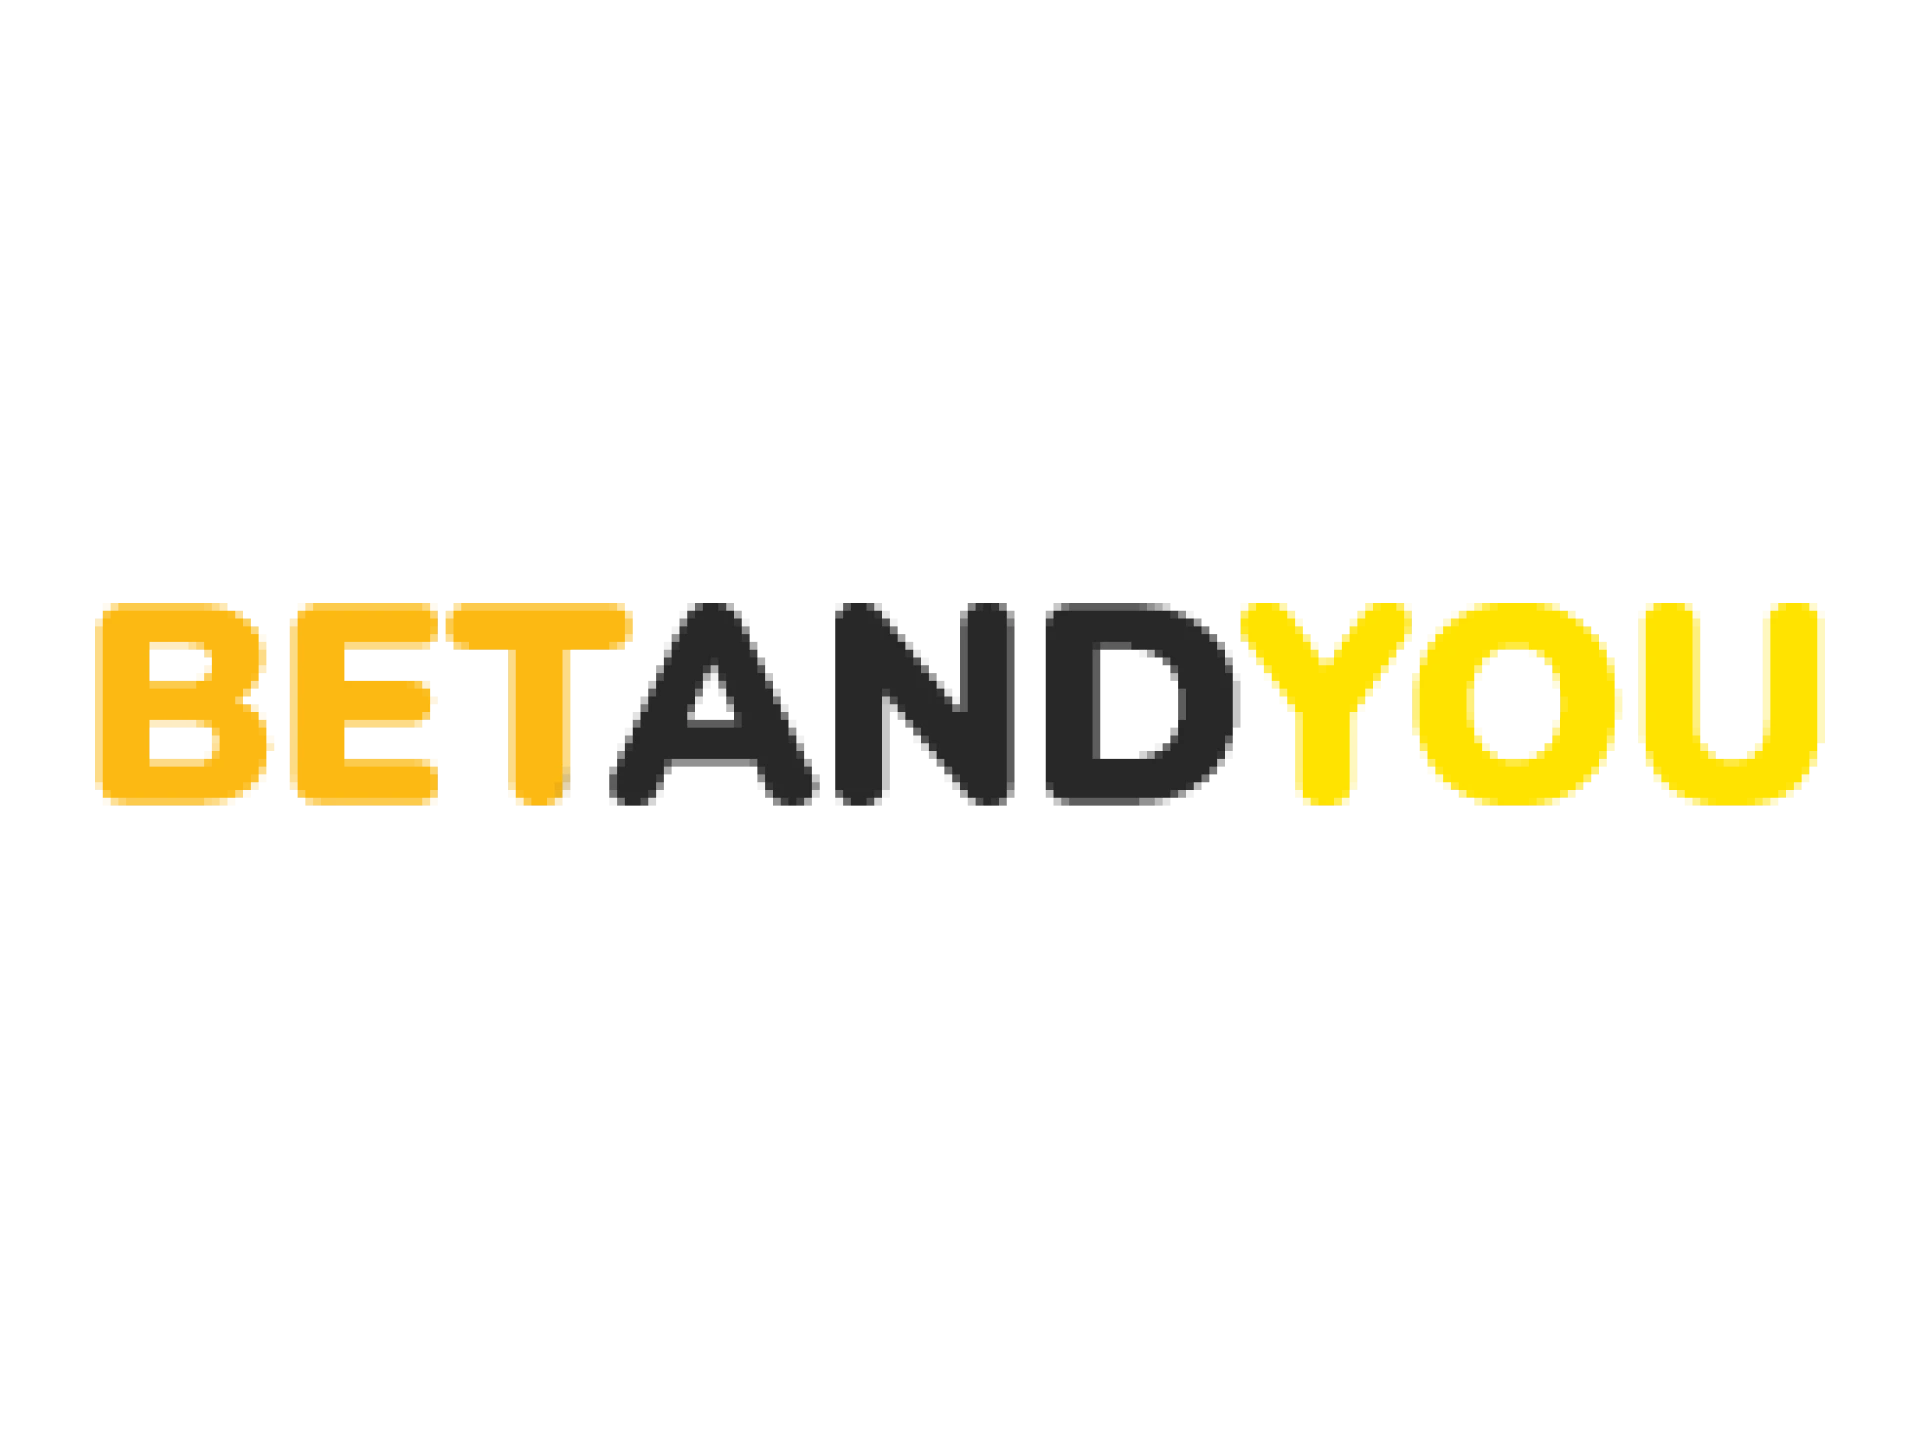 Betandyou has an app where you can bet on cricket.